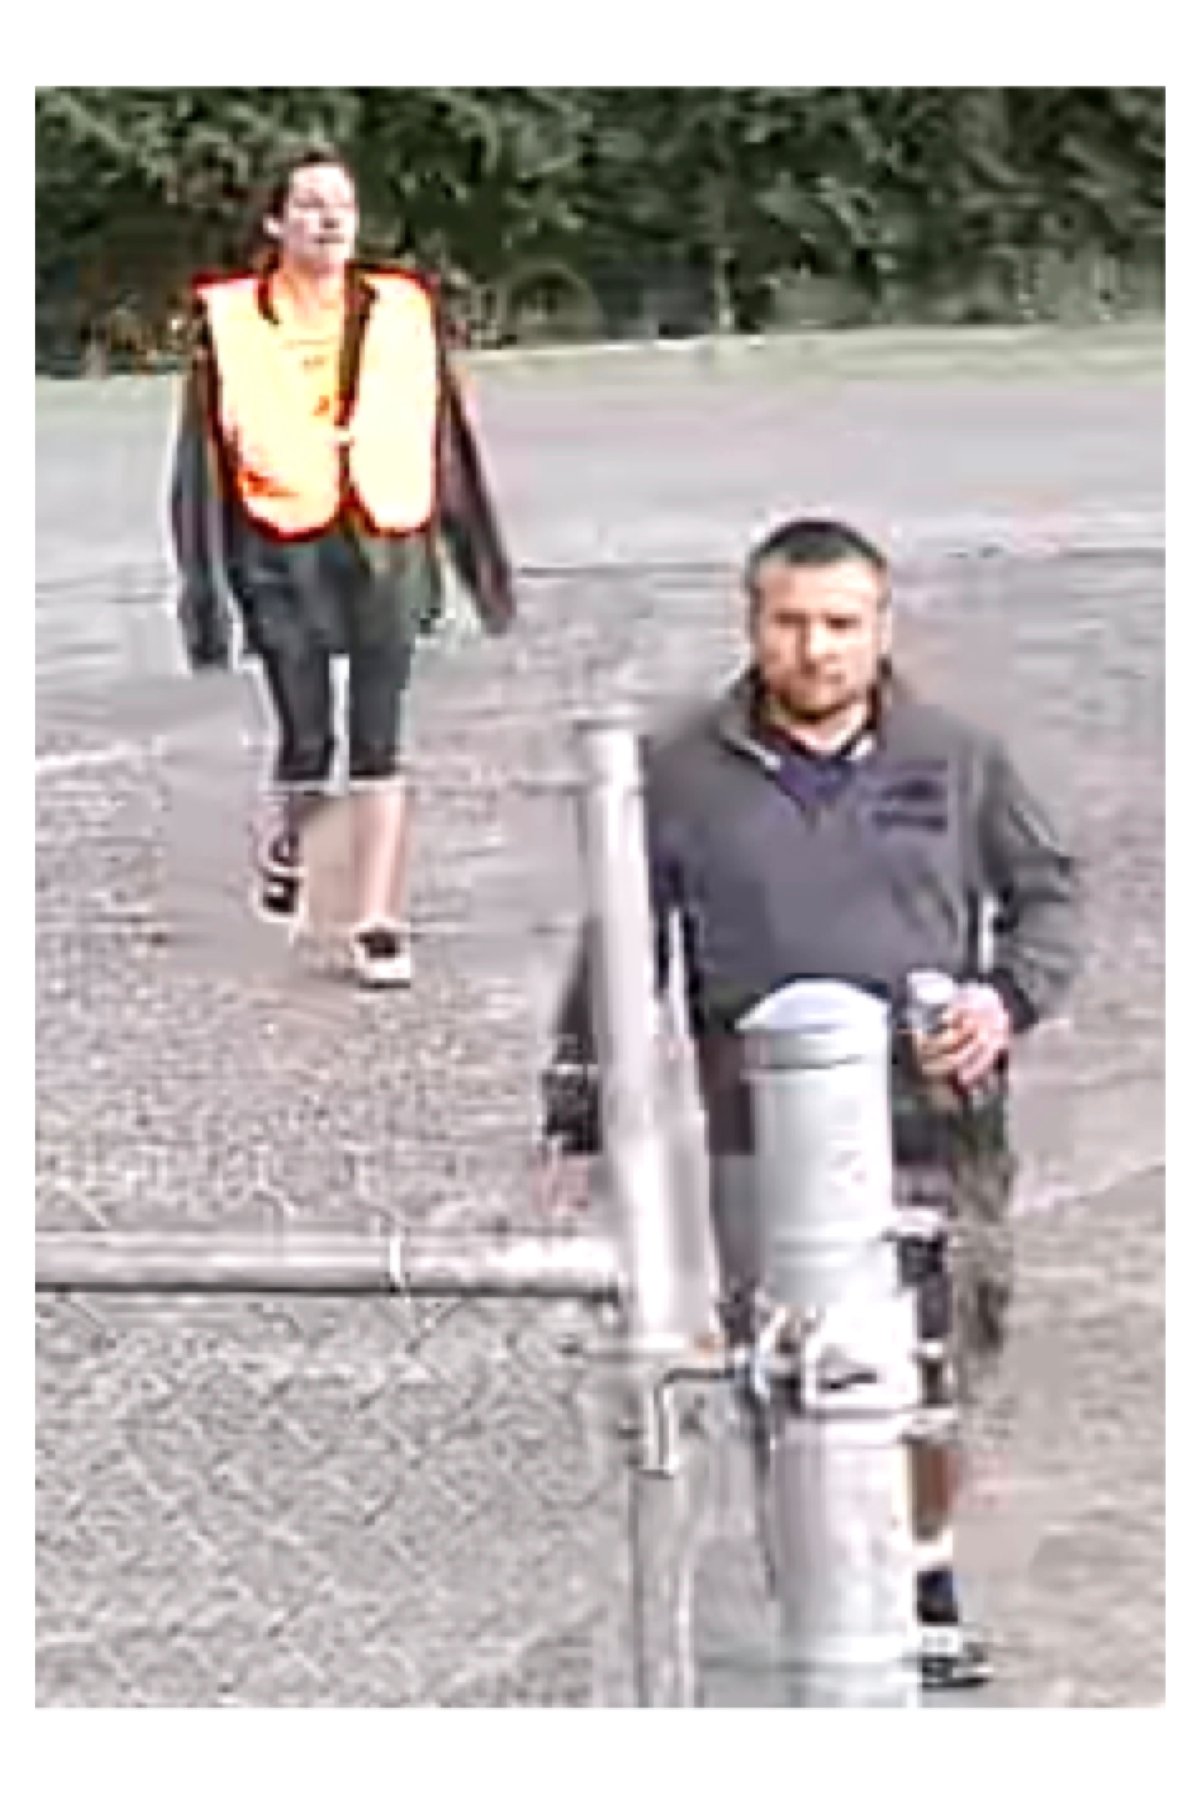 OPP say these two people are suspects in a weekend break and enter at a transfer station near Bobcaygeon.